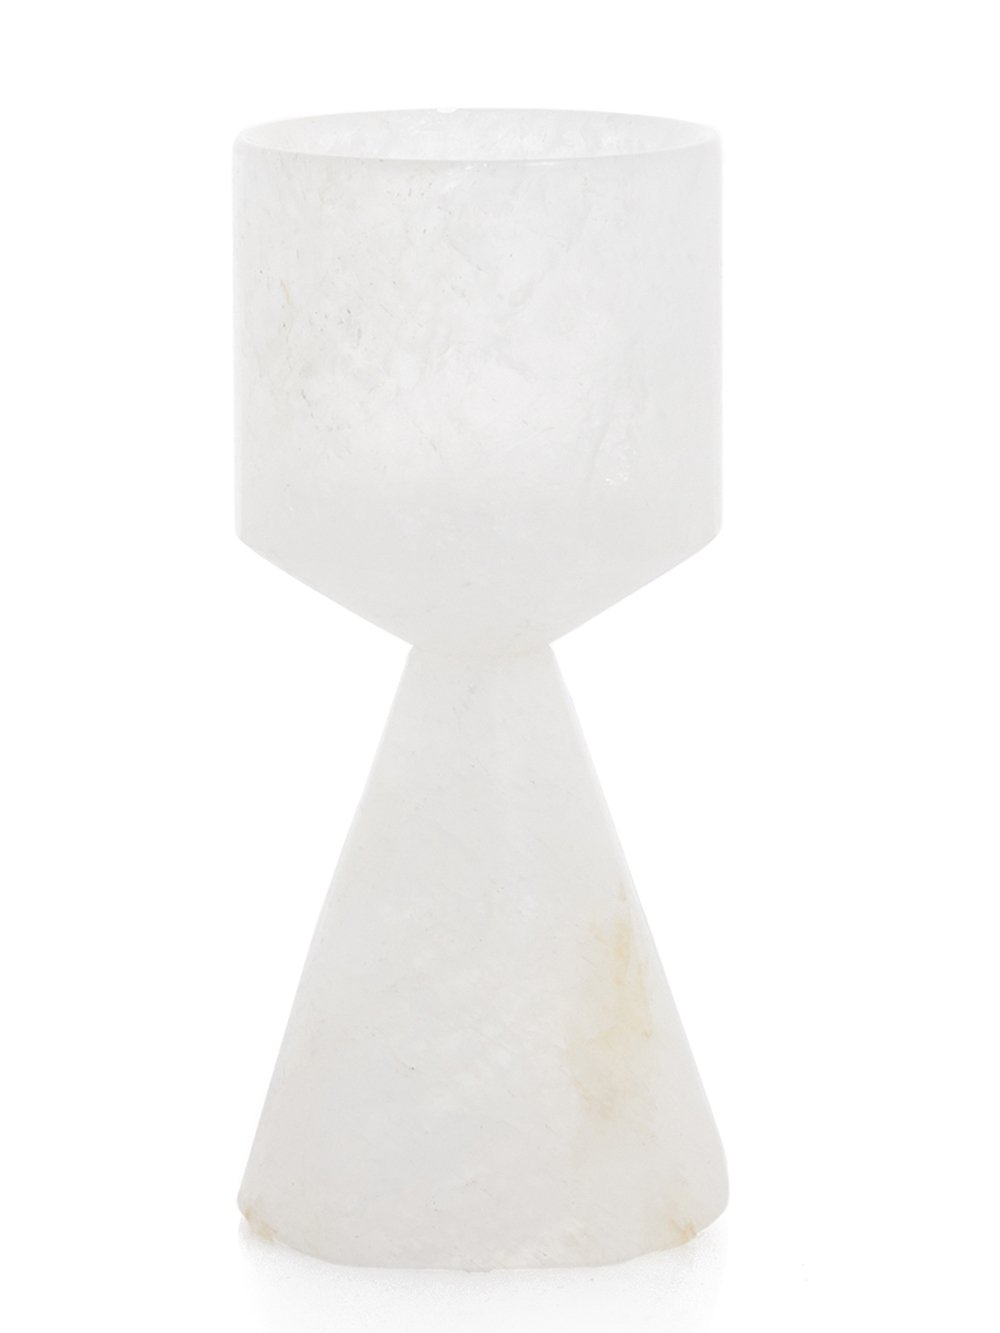 RICK OWENS CHALICE IN WHITE ROCK CRYSTAL